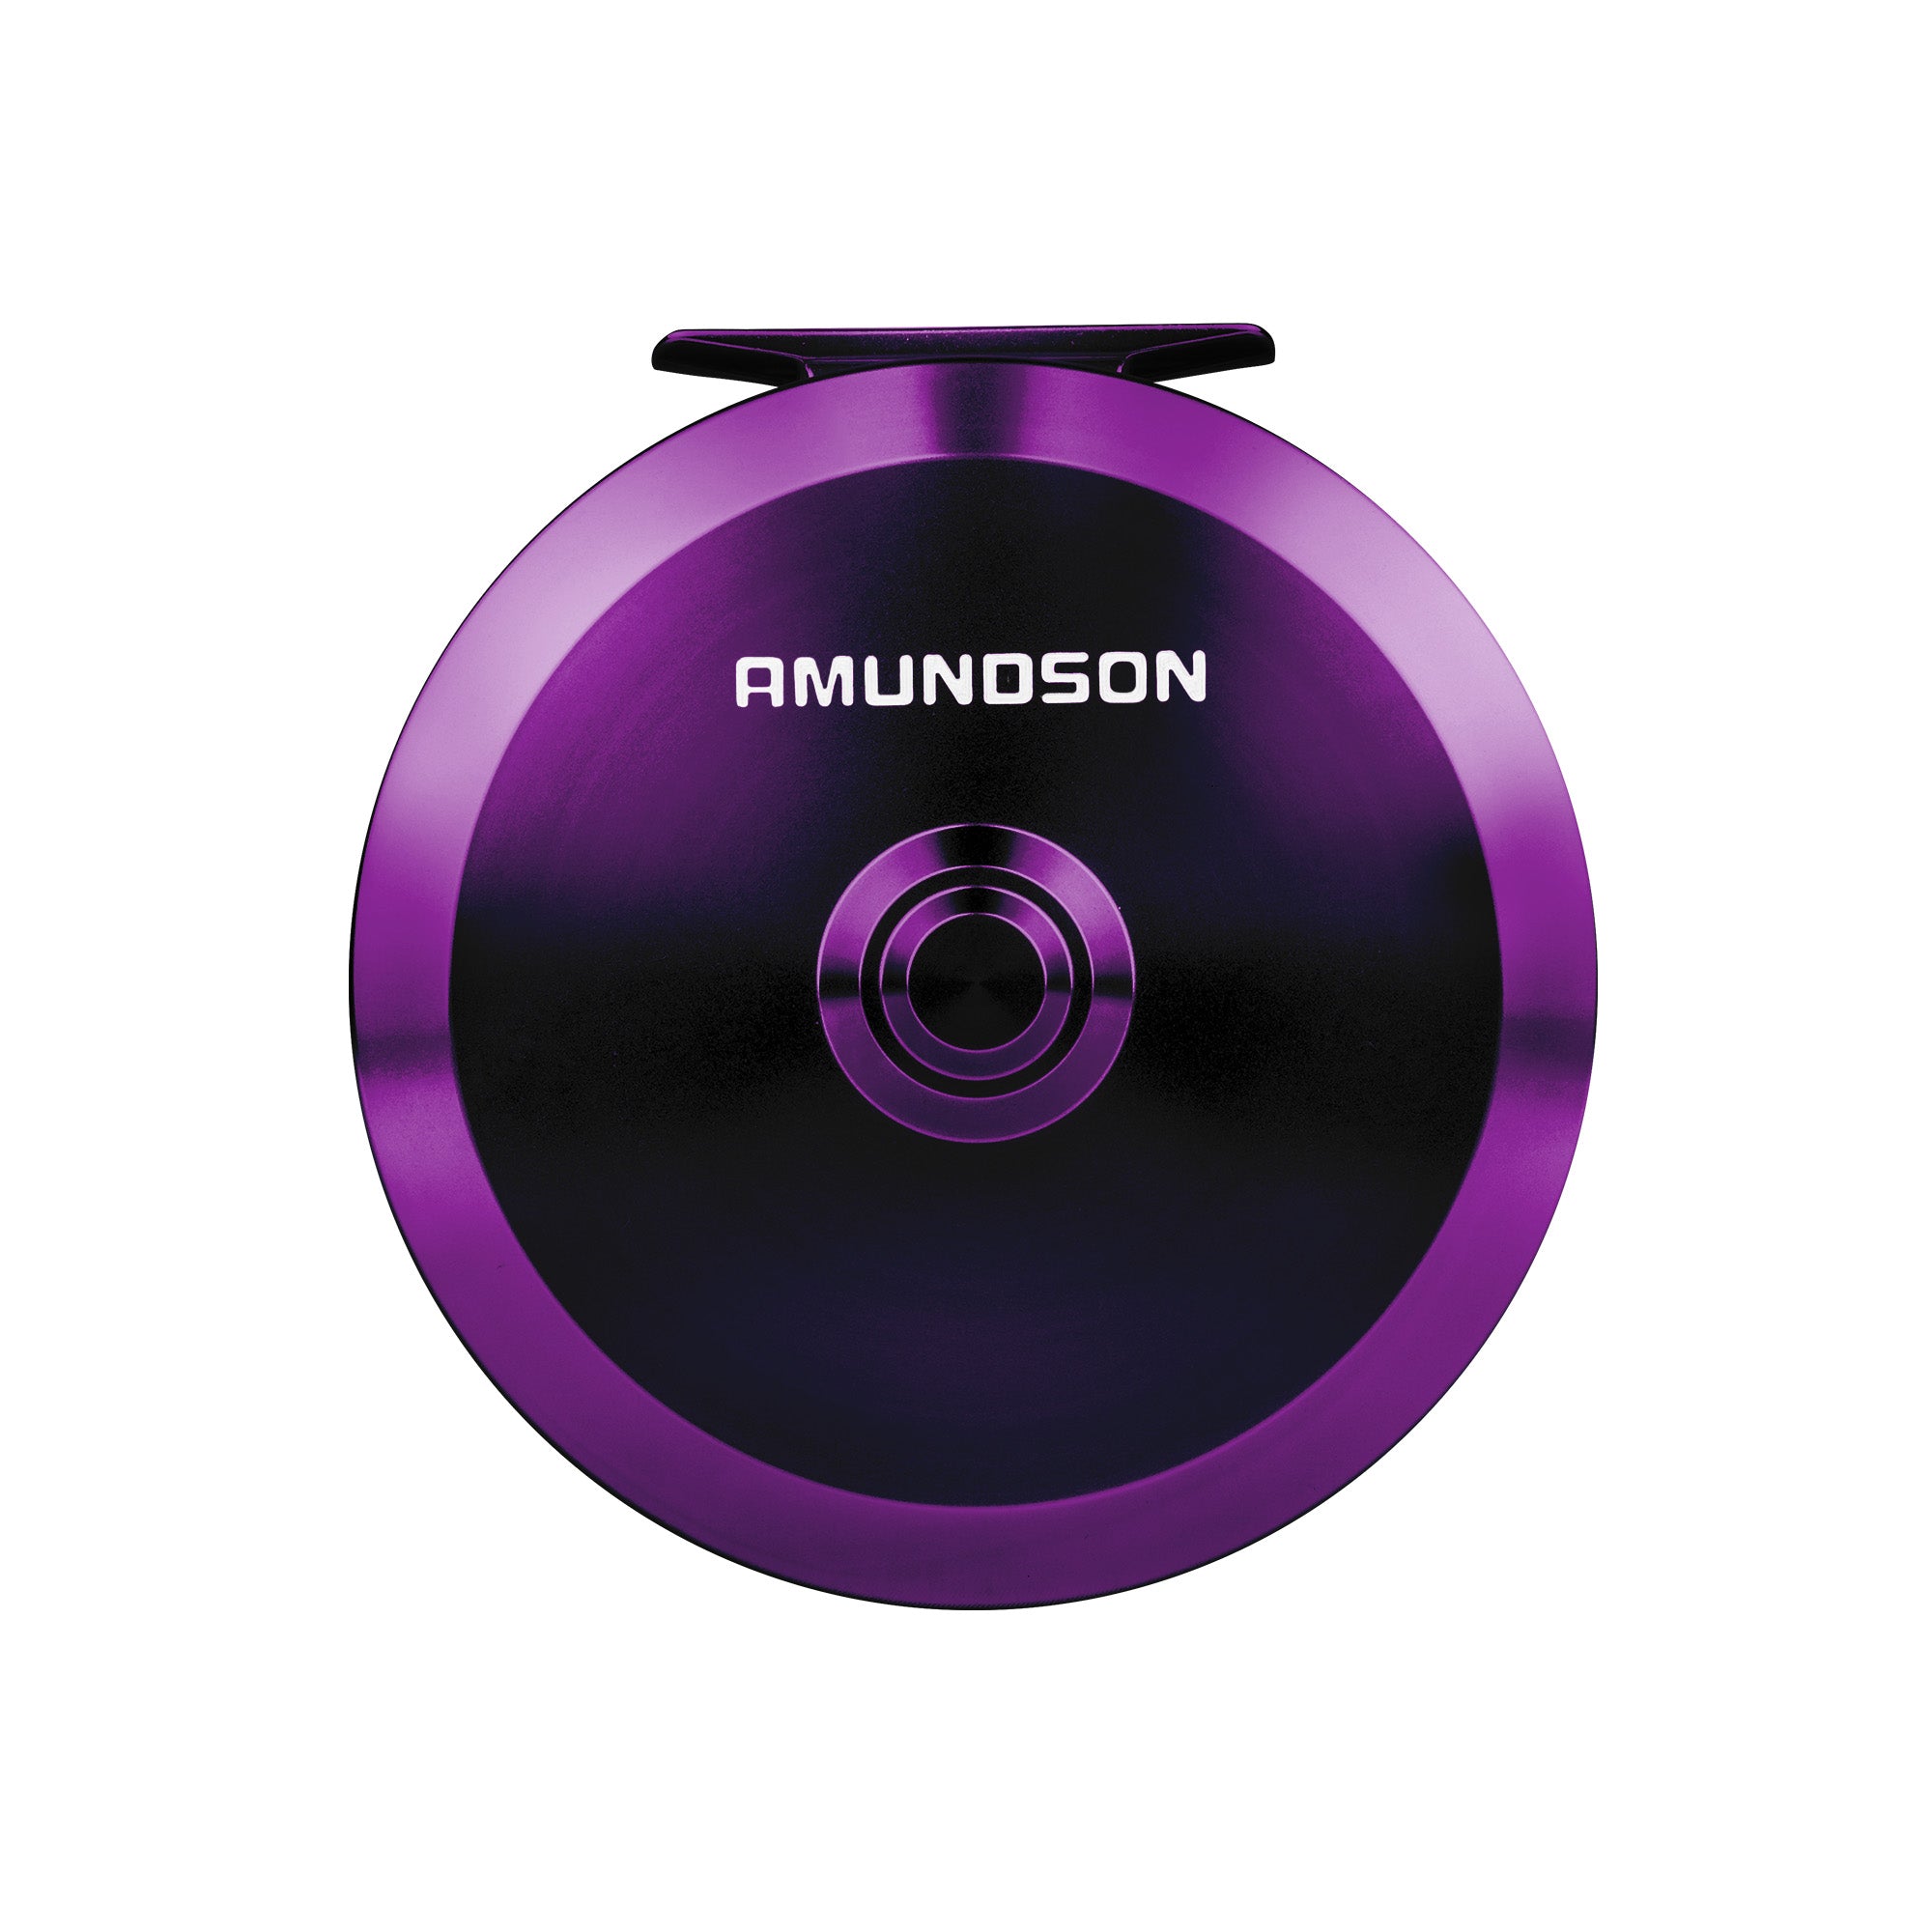 Amundson Outdoor Trend X5 Mooching Reel in Black w/ Paddle Handle